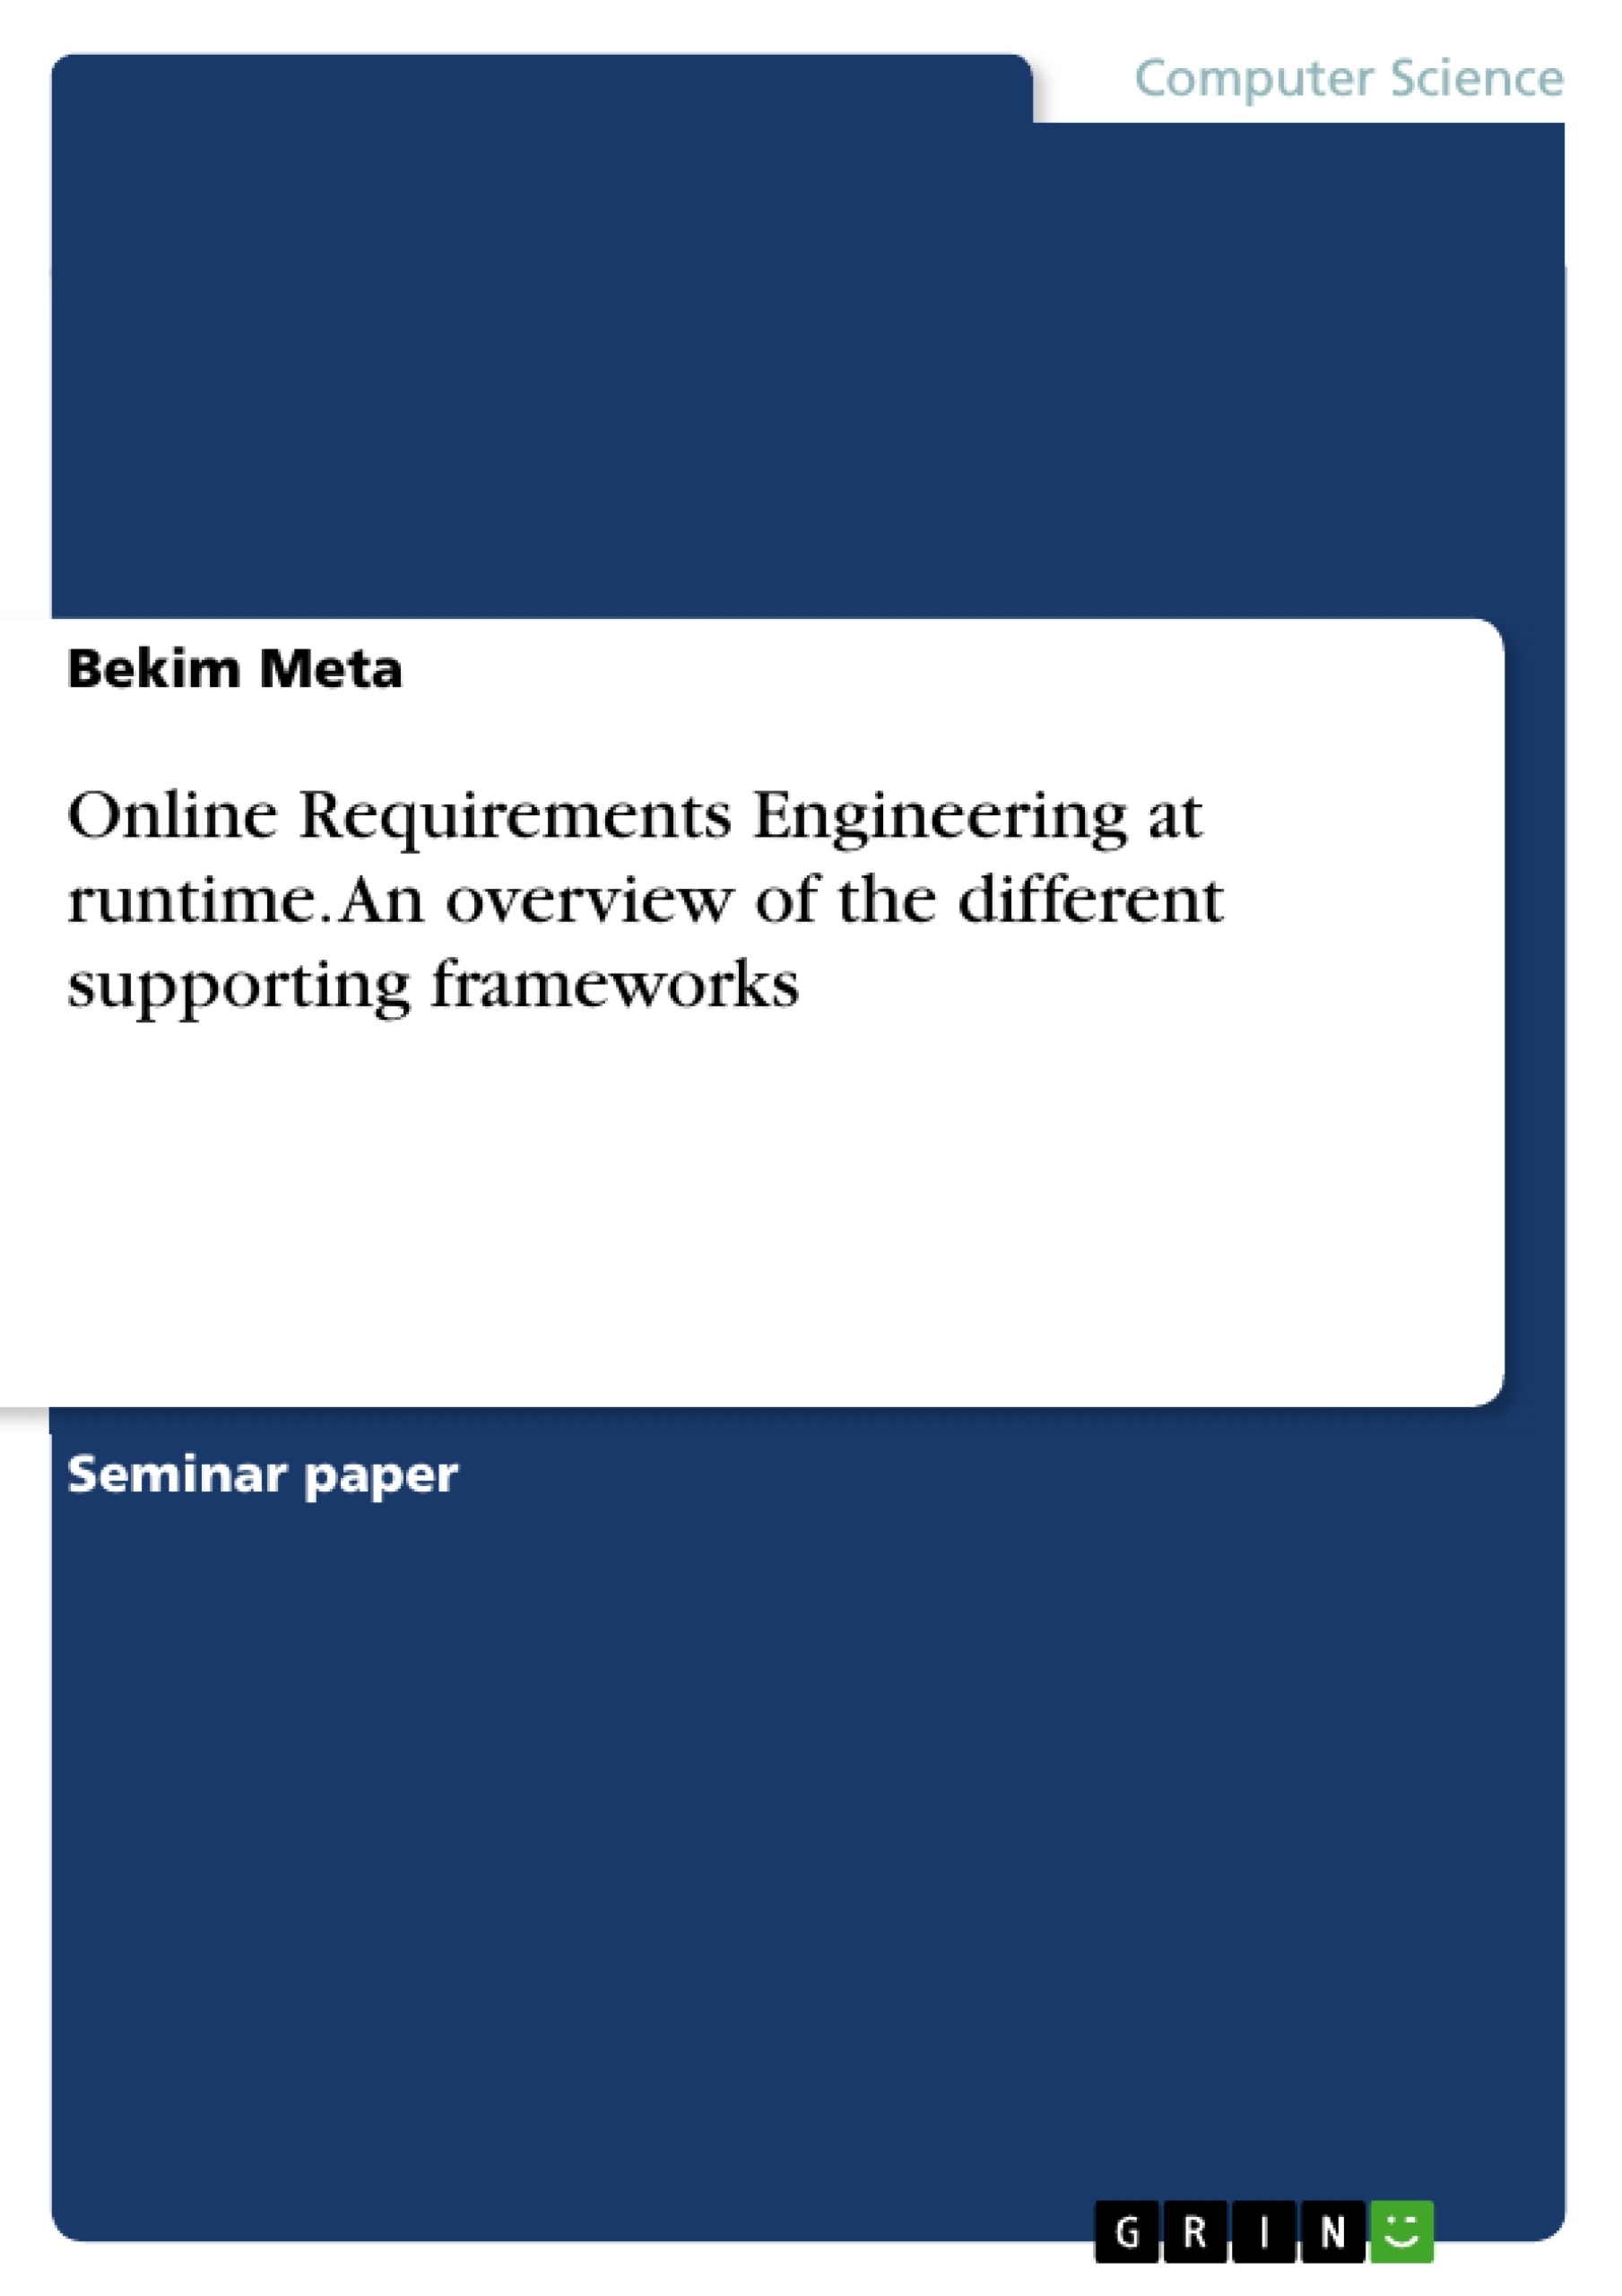 Título: Online Requirements Engineering at runtime. An overview of the different supporting frameworks